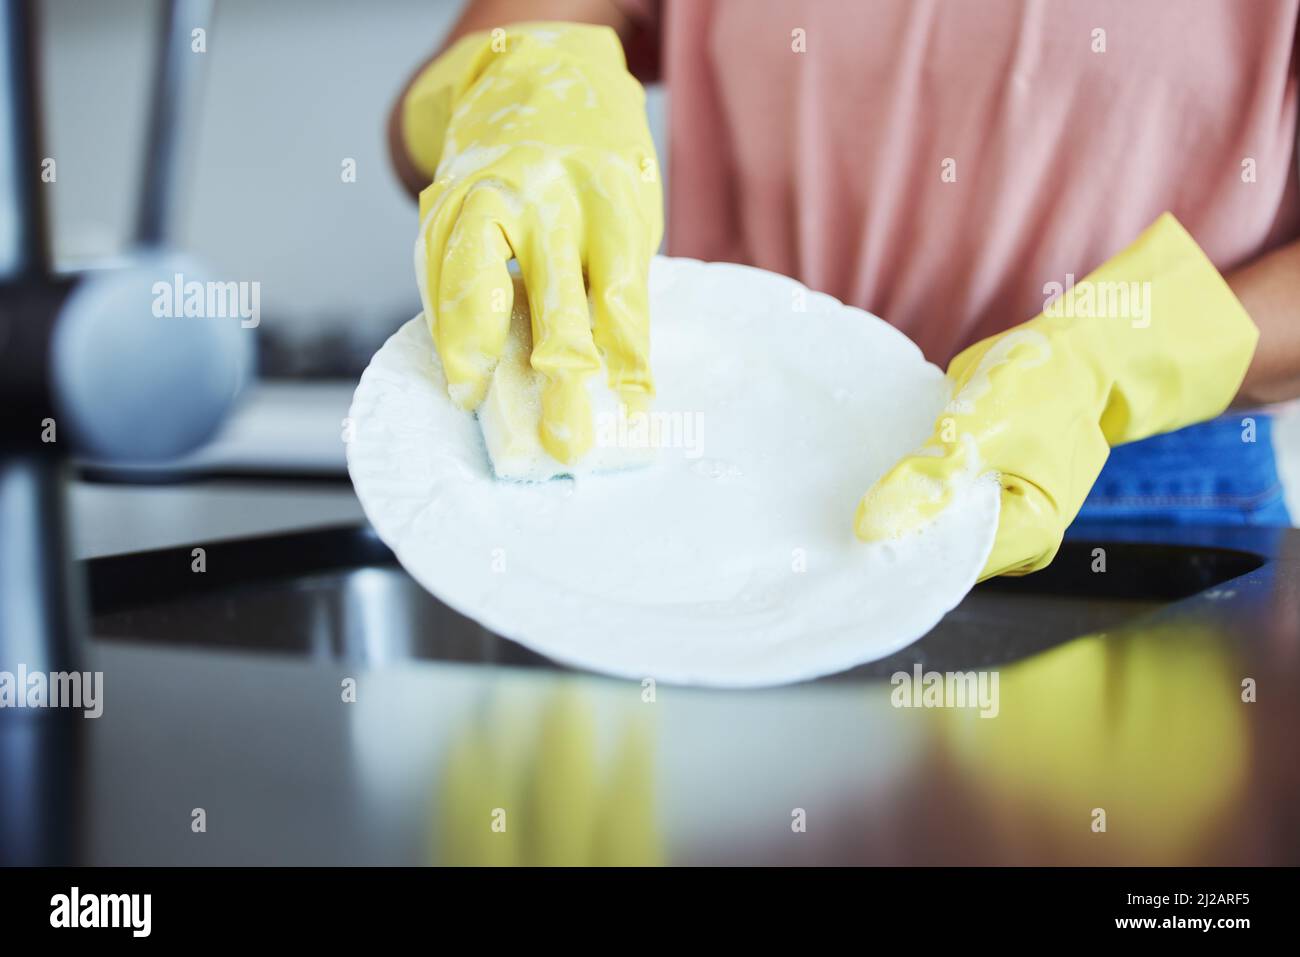 I love seeing clean dishes. Shot of a woman washing dishes in her kitchen. Stock Photo